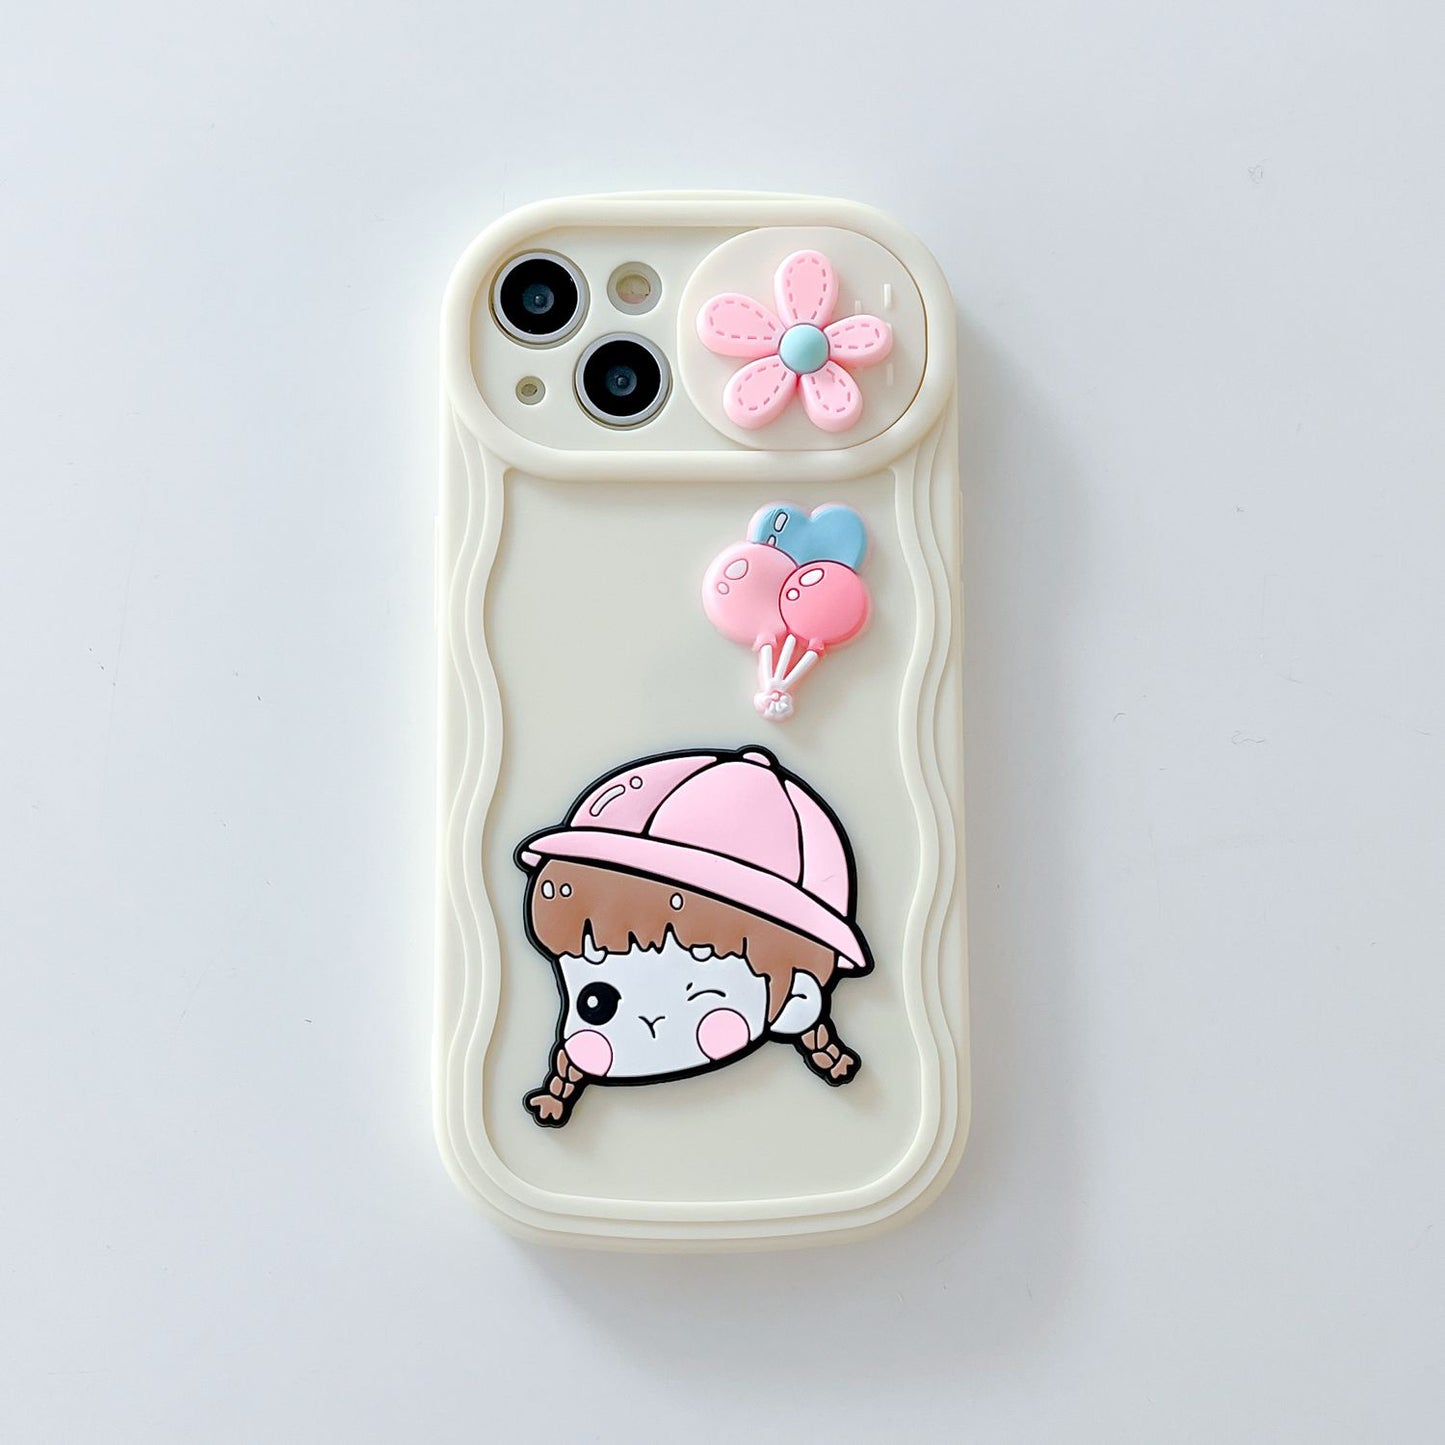 Cute & Playful Blossom Case - iPhone